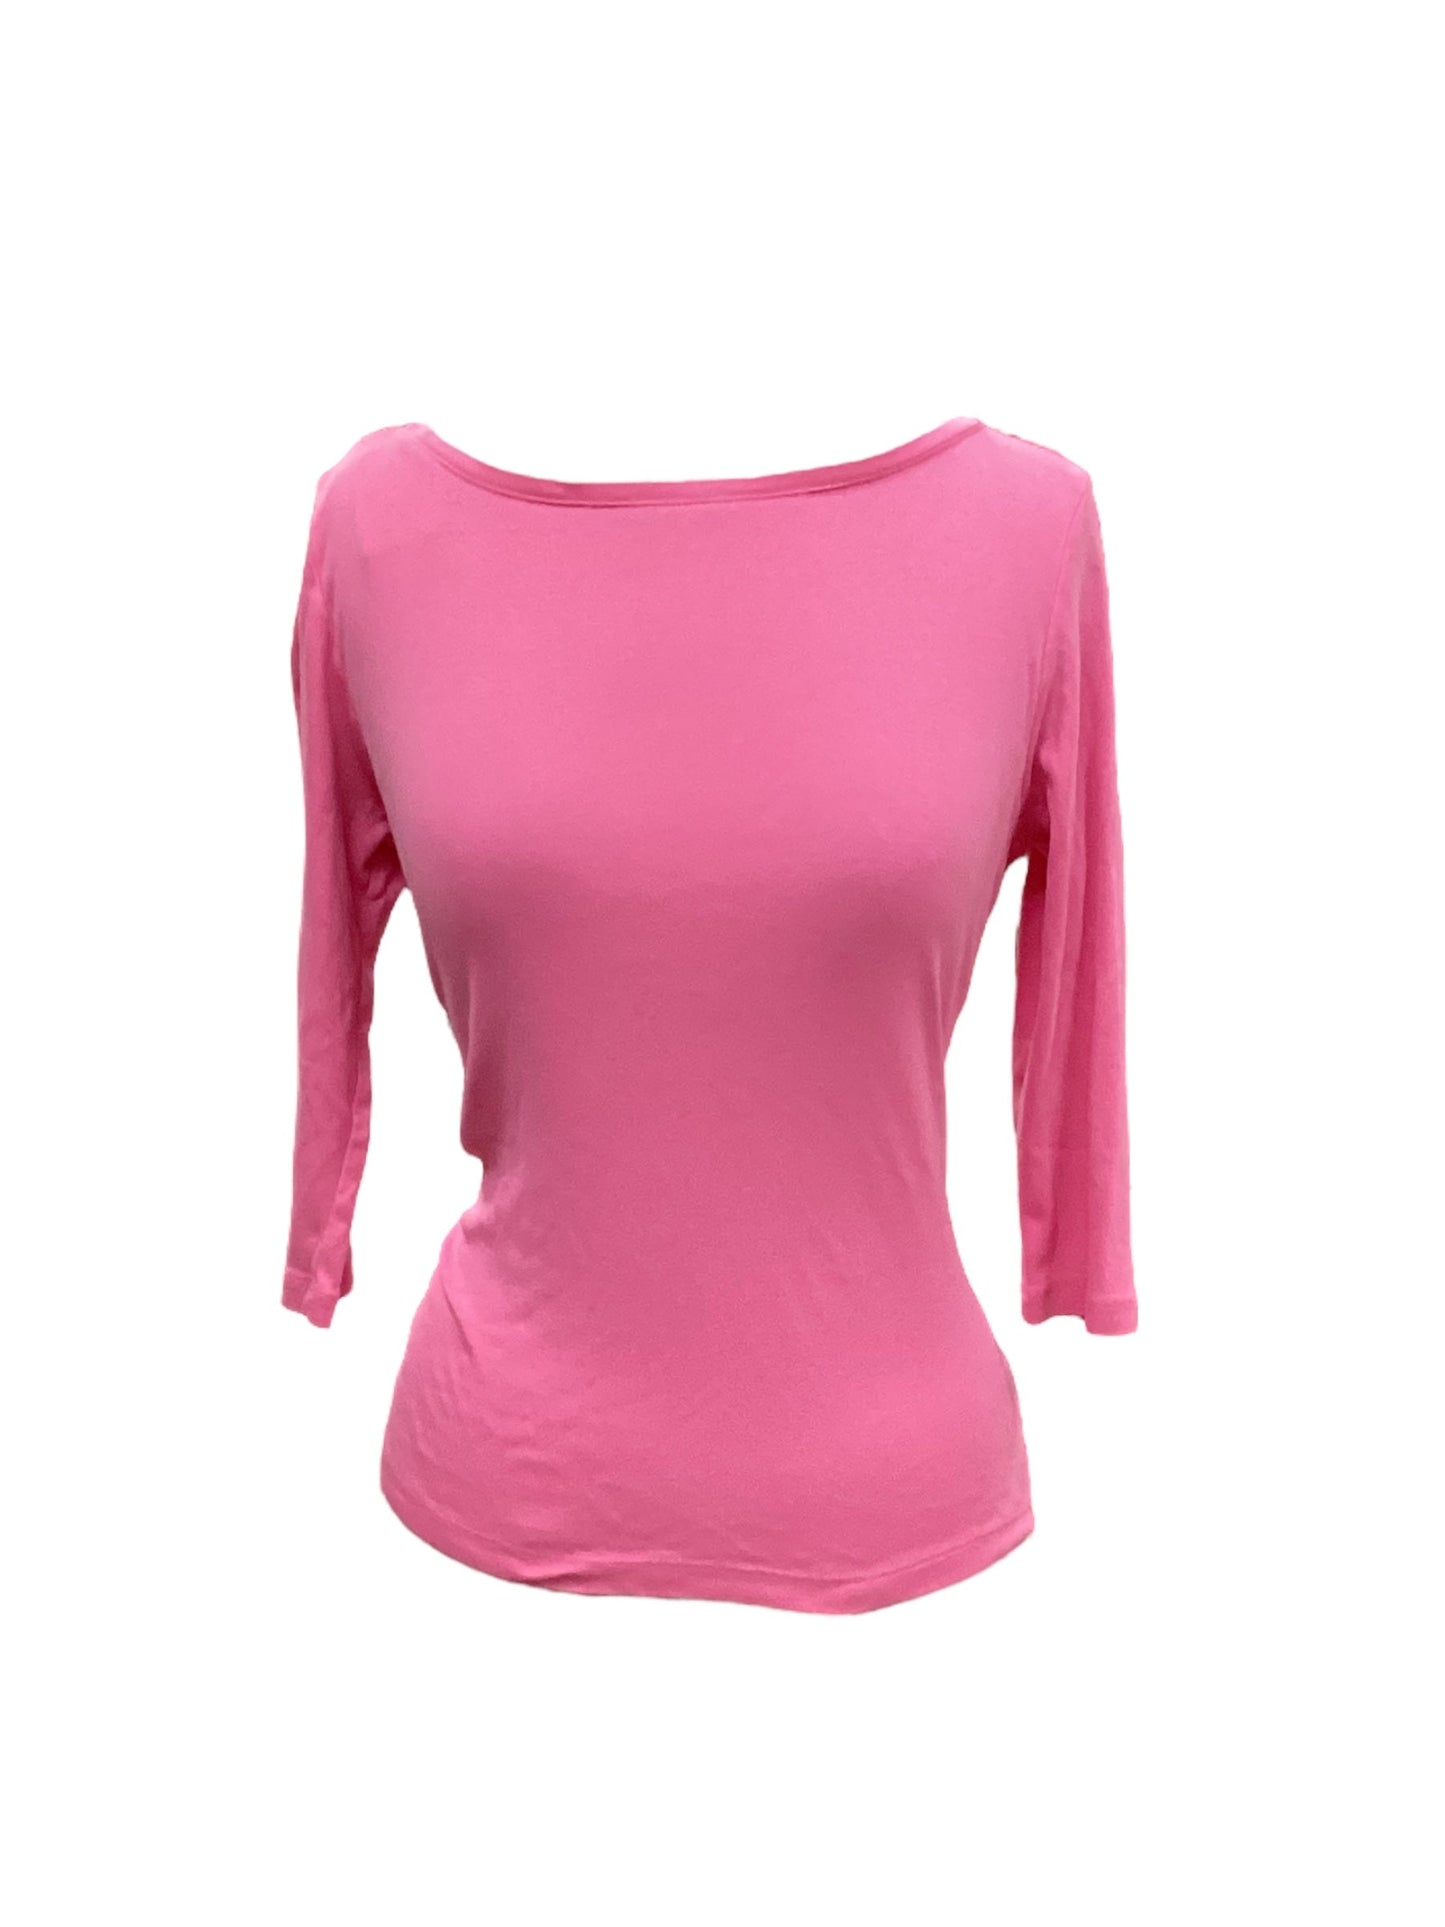 Pink Top 3/4 Sleeve Talbots, Size M